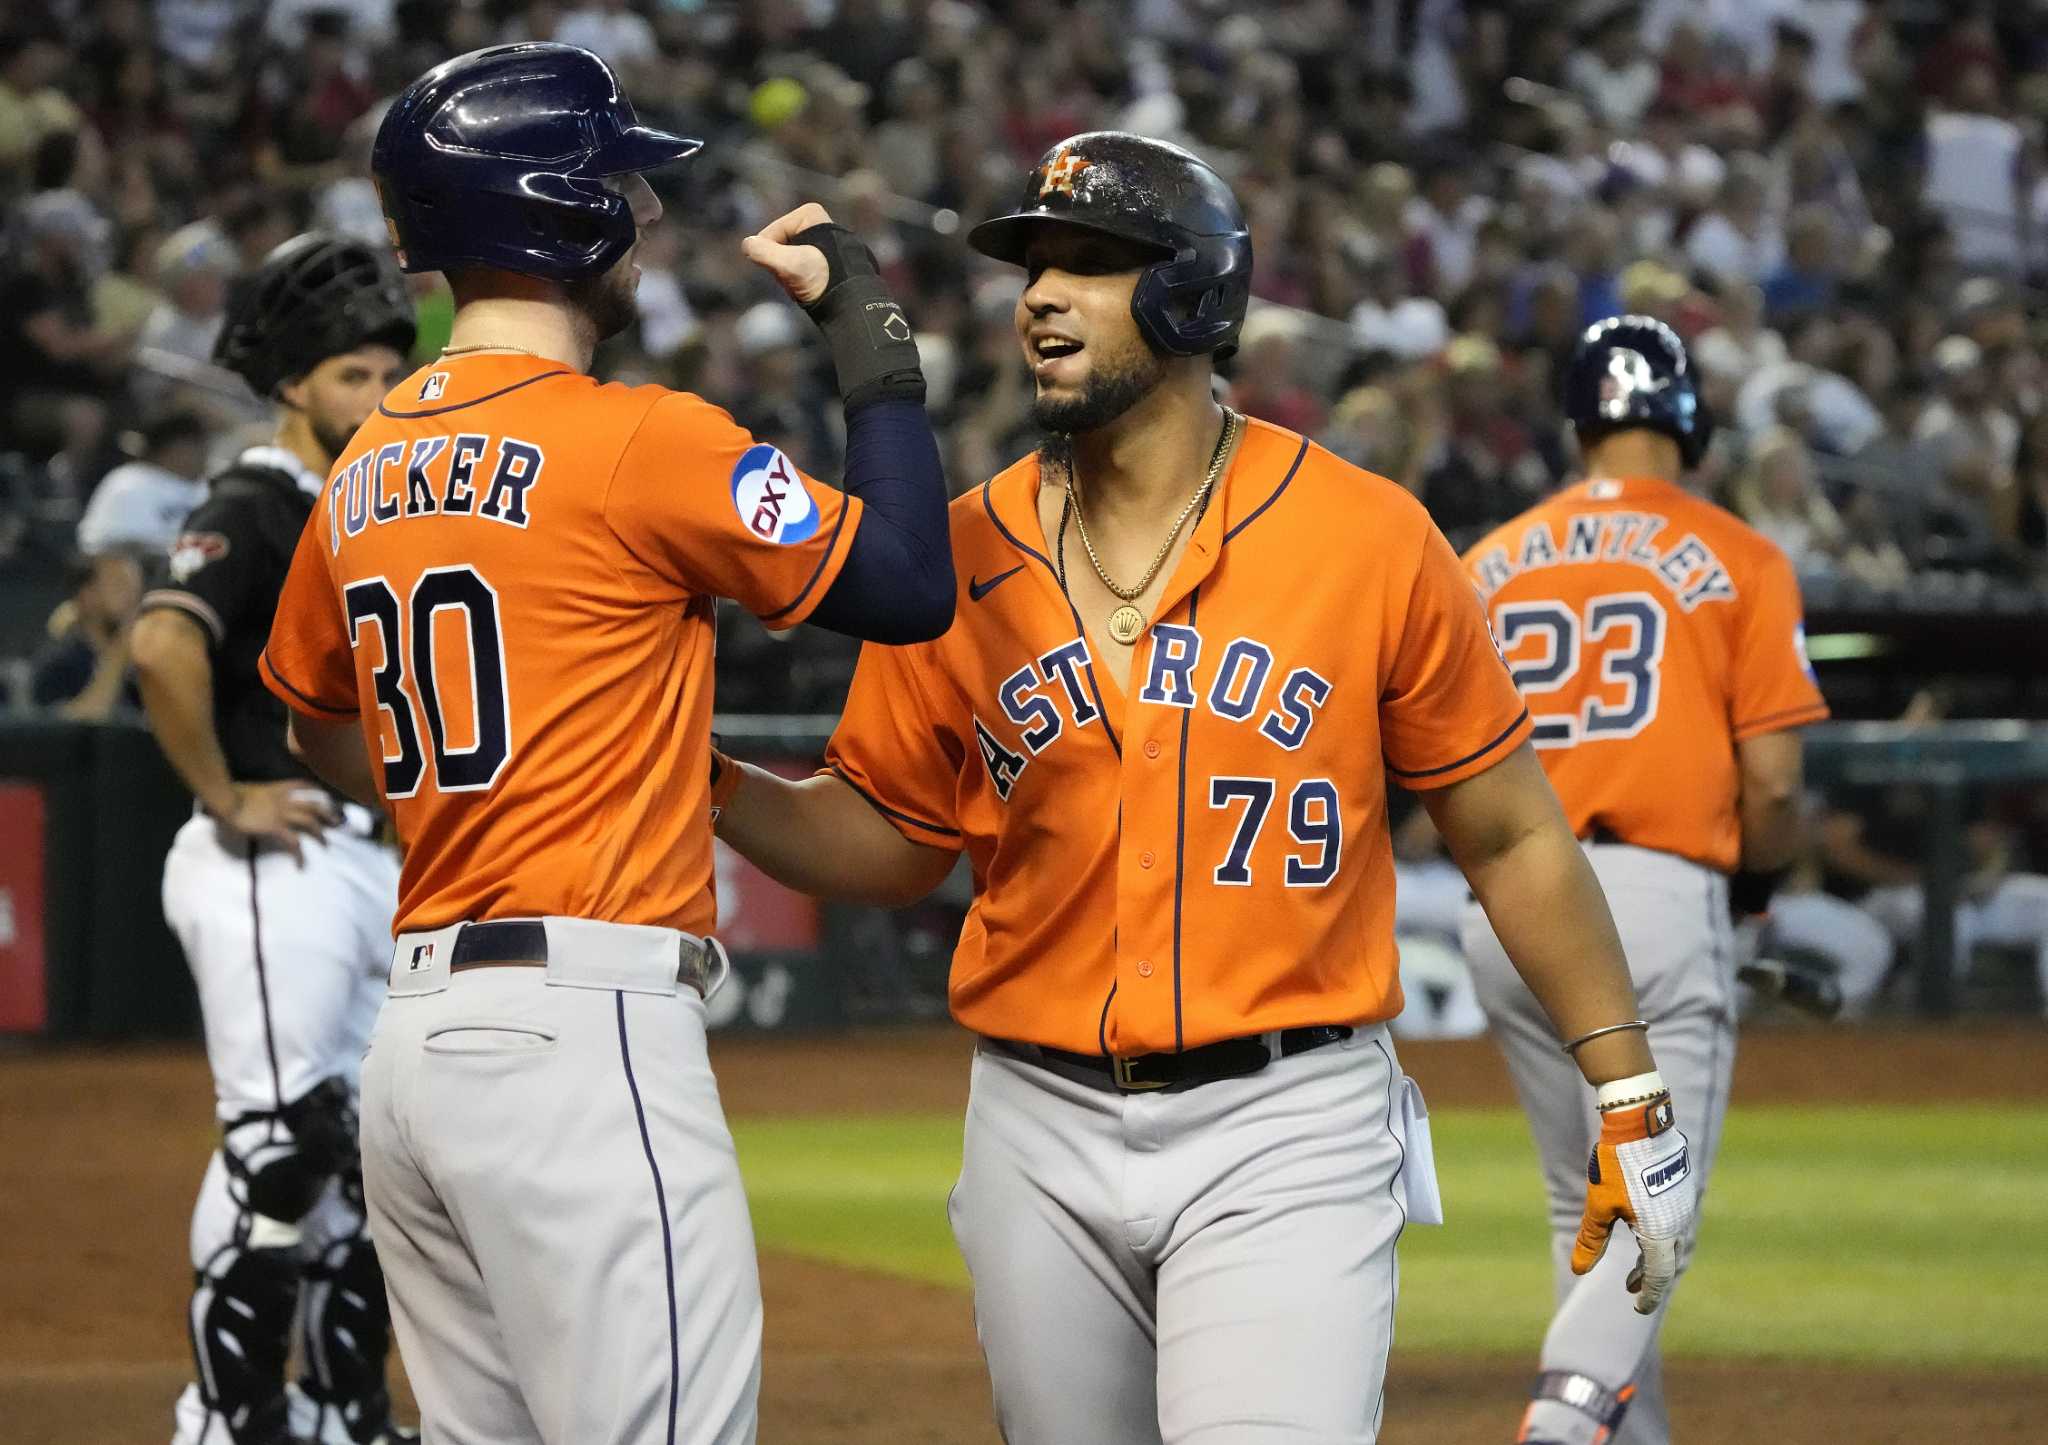 Astros' playoff hopes come down to the season's final week